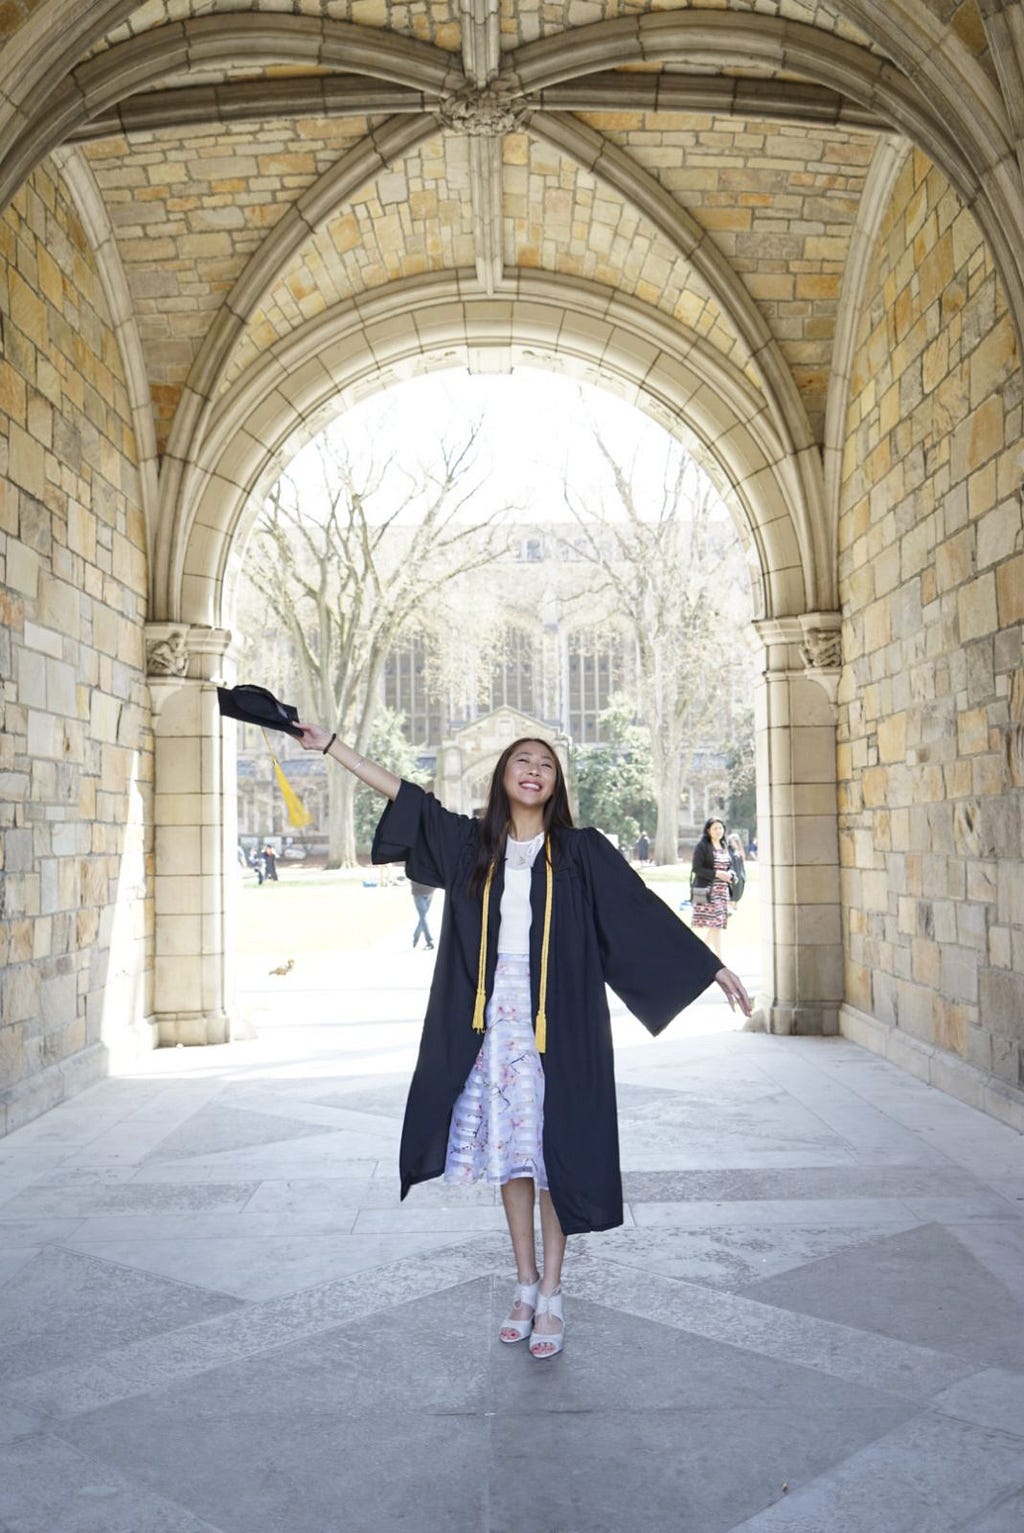 The day I graduated from University of Michigan!